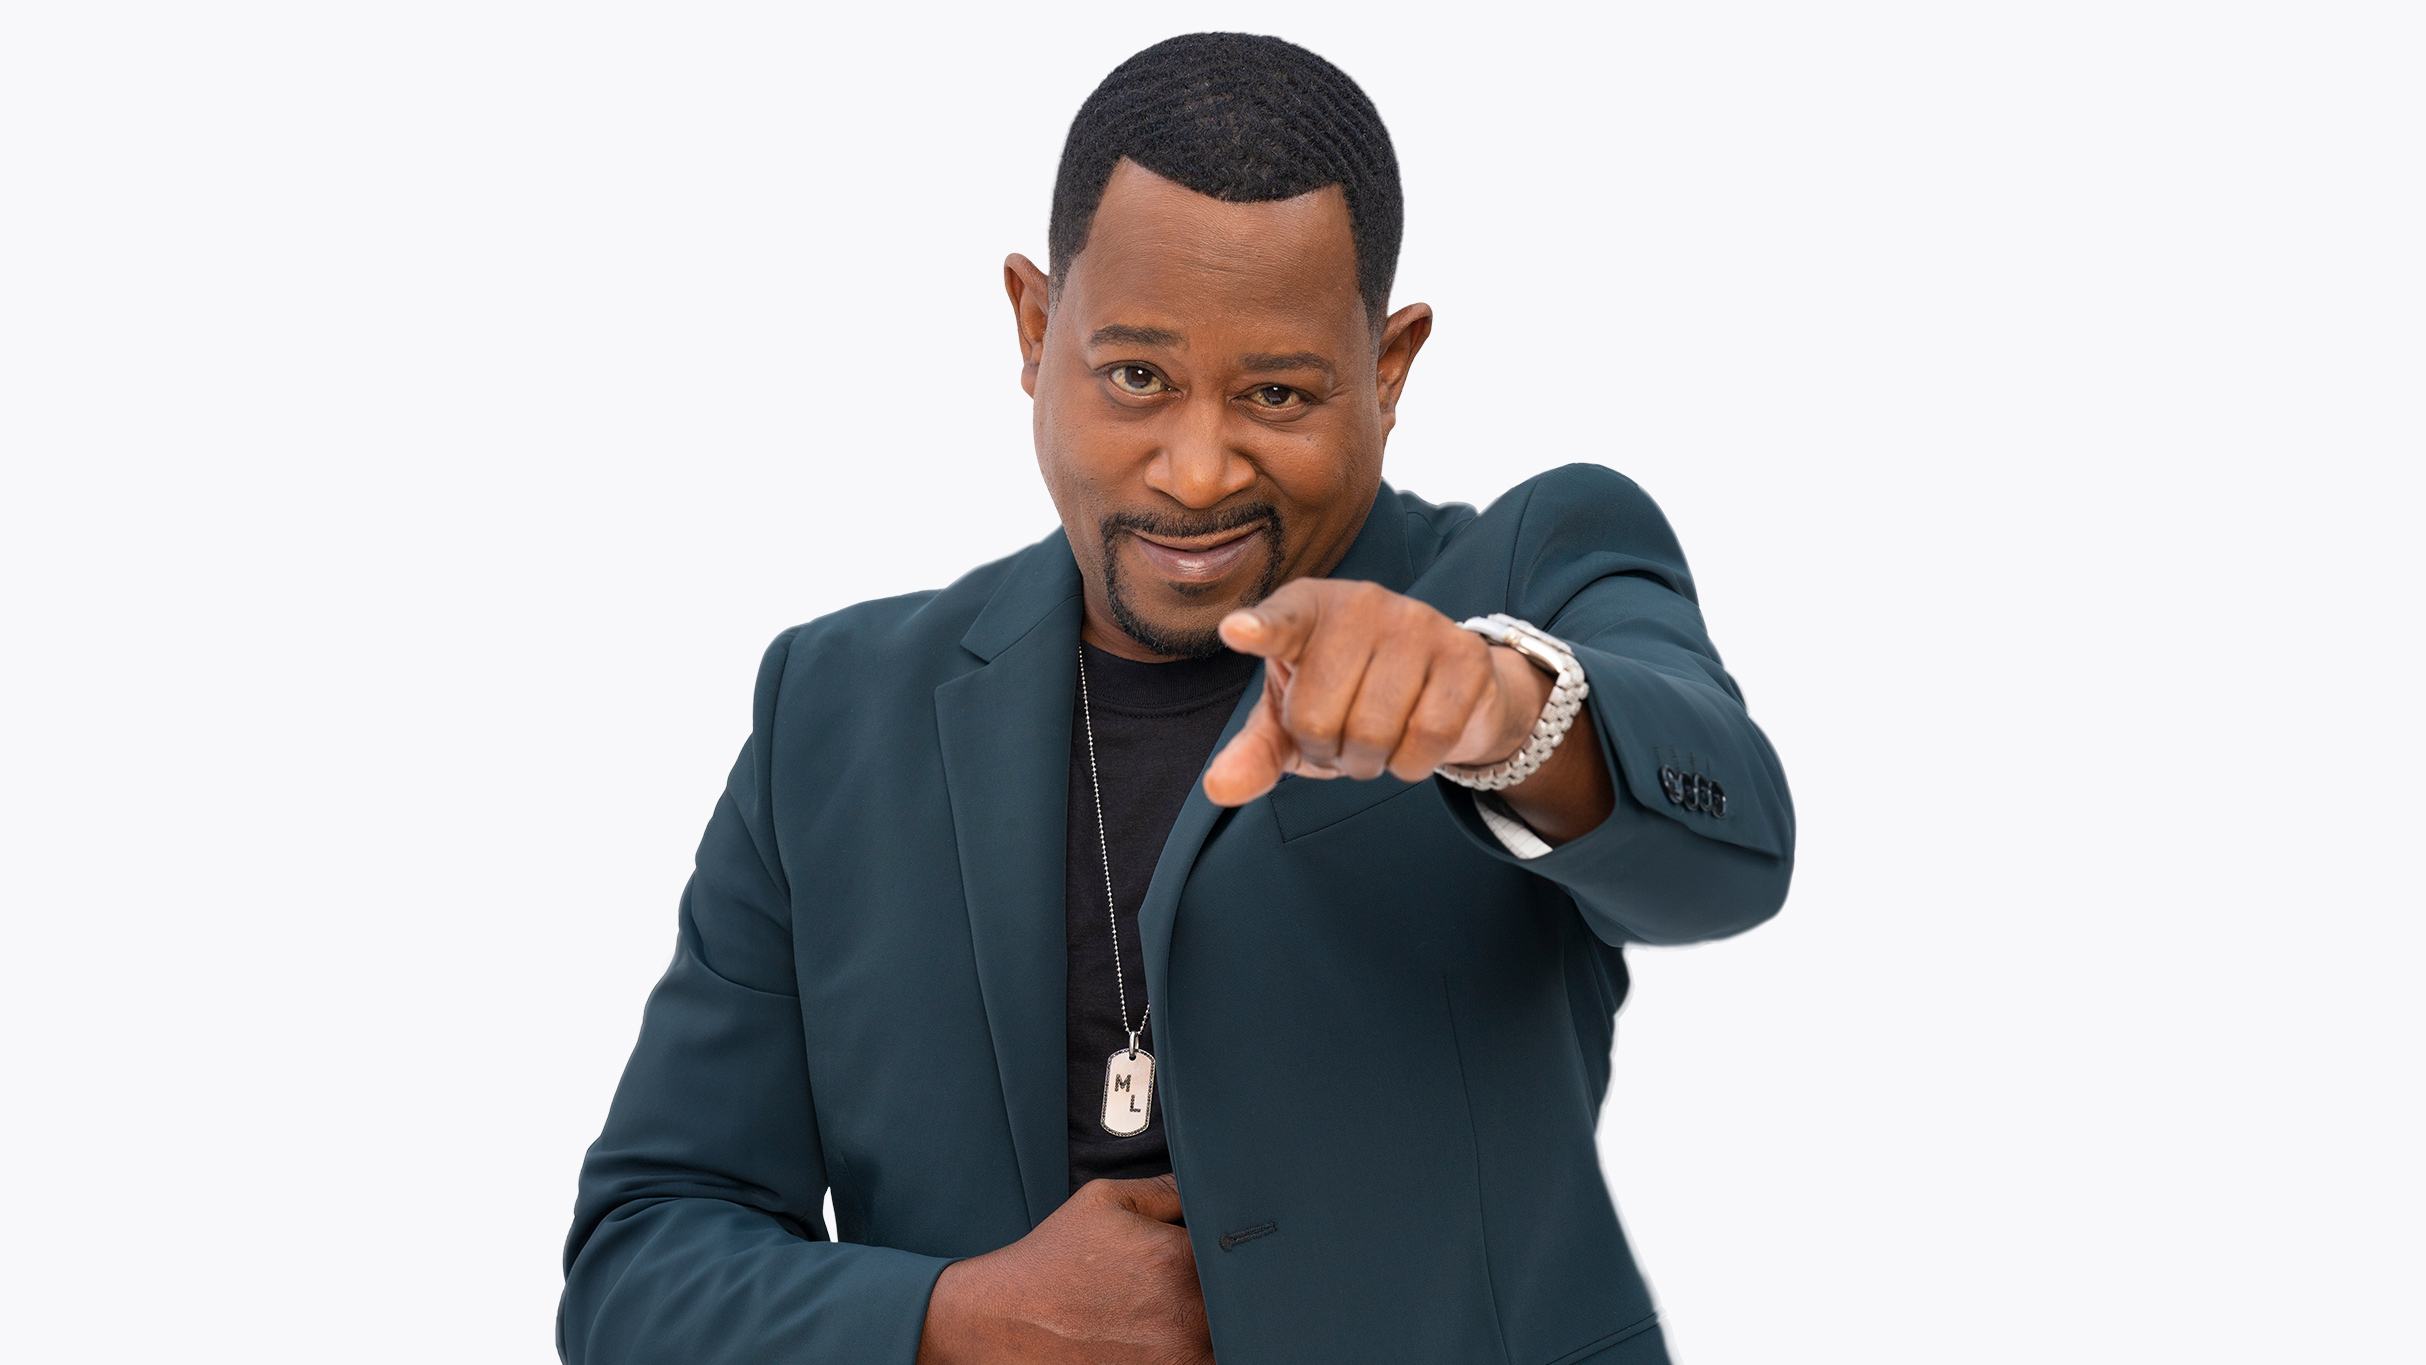 Martin Lawrence with special guest Deon Cole